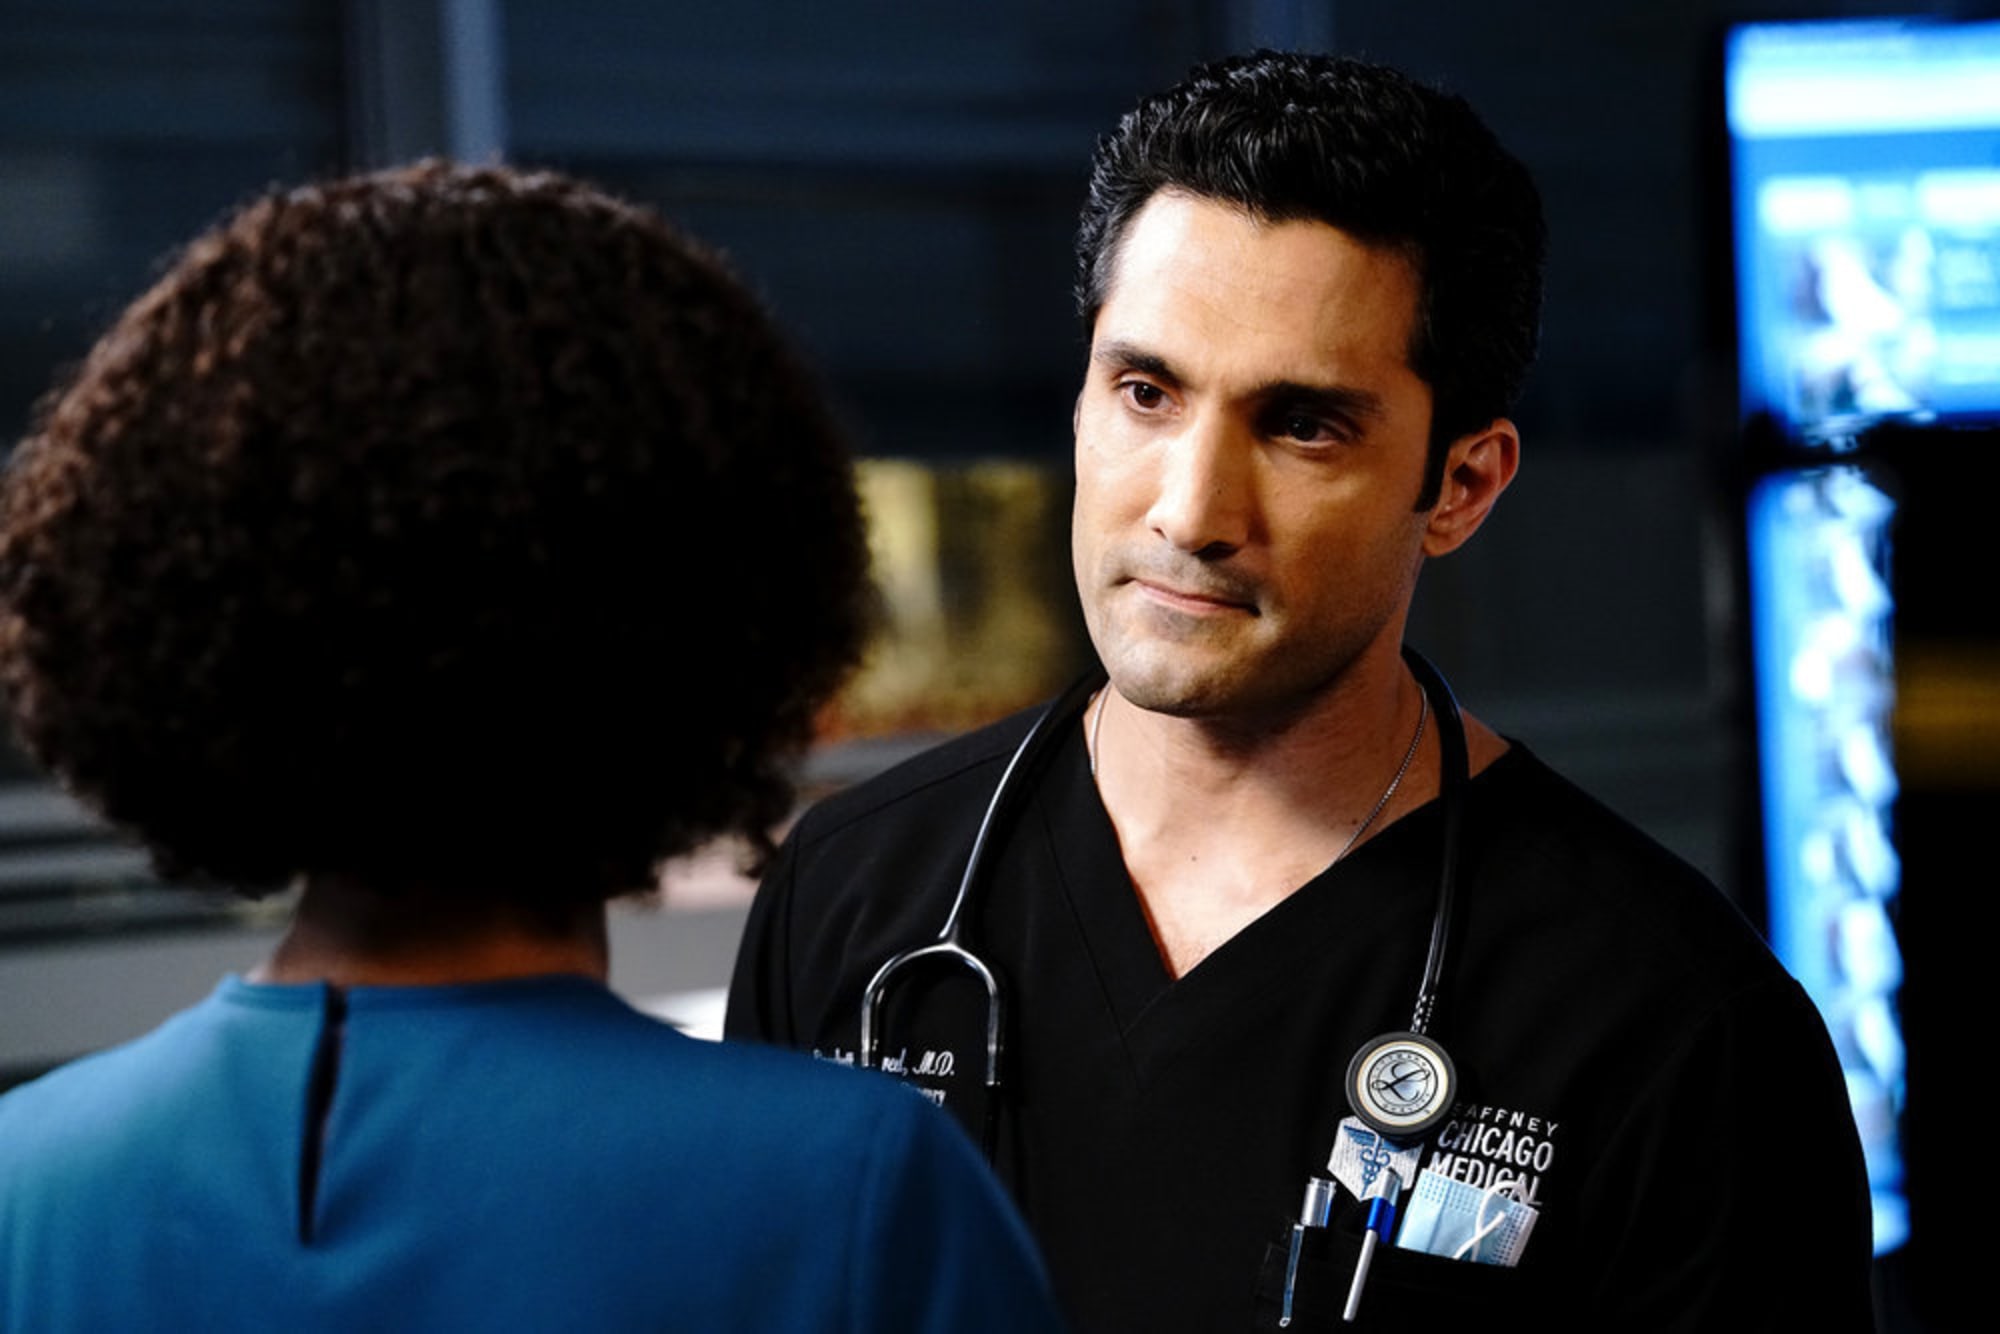 Chicago Med season 7 release date, cast, synopsis, trailer, and more